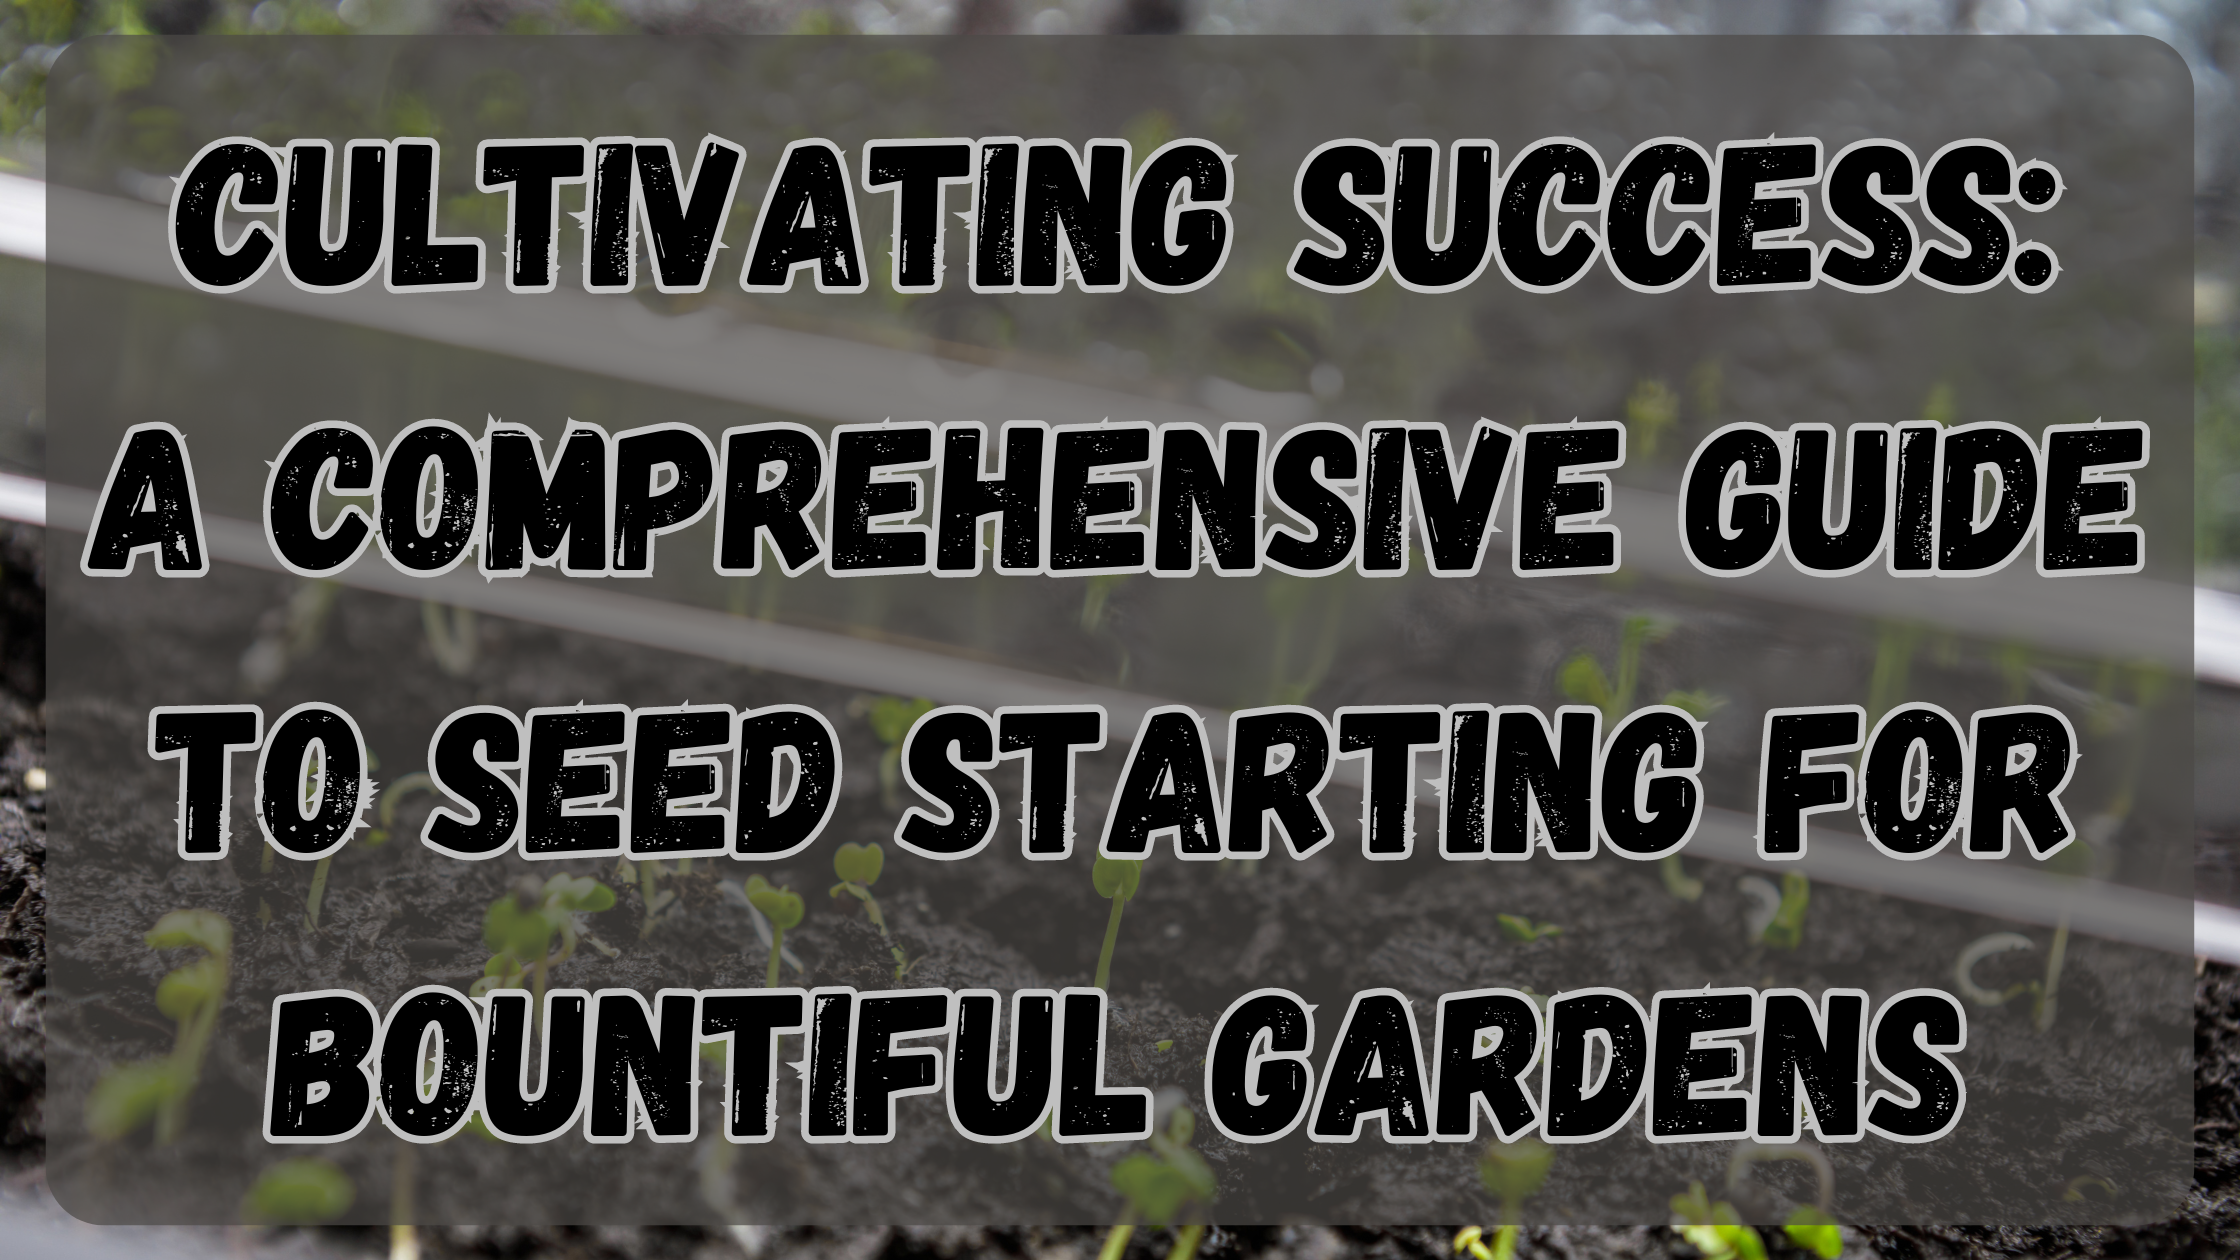 Cultivating Success: A Comprehensive Guide to Seed Starting for Bountiful Gardens